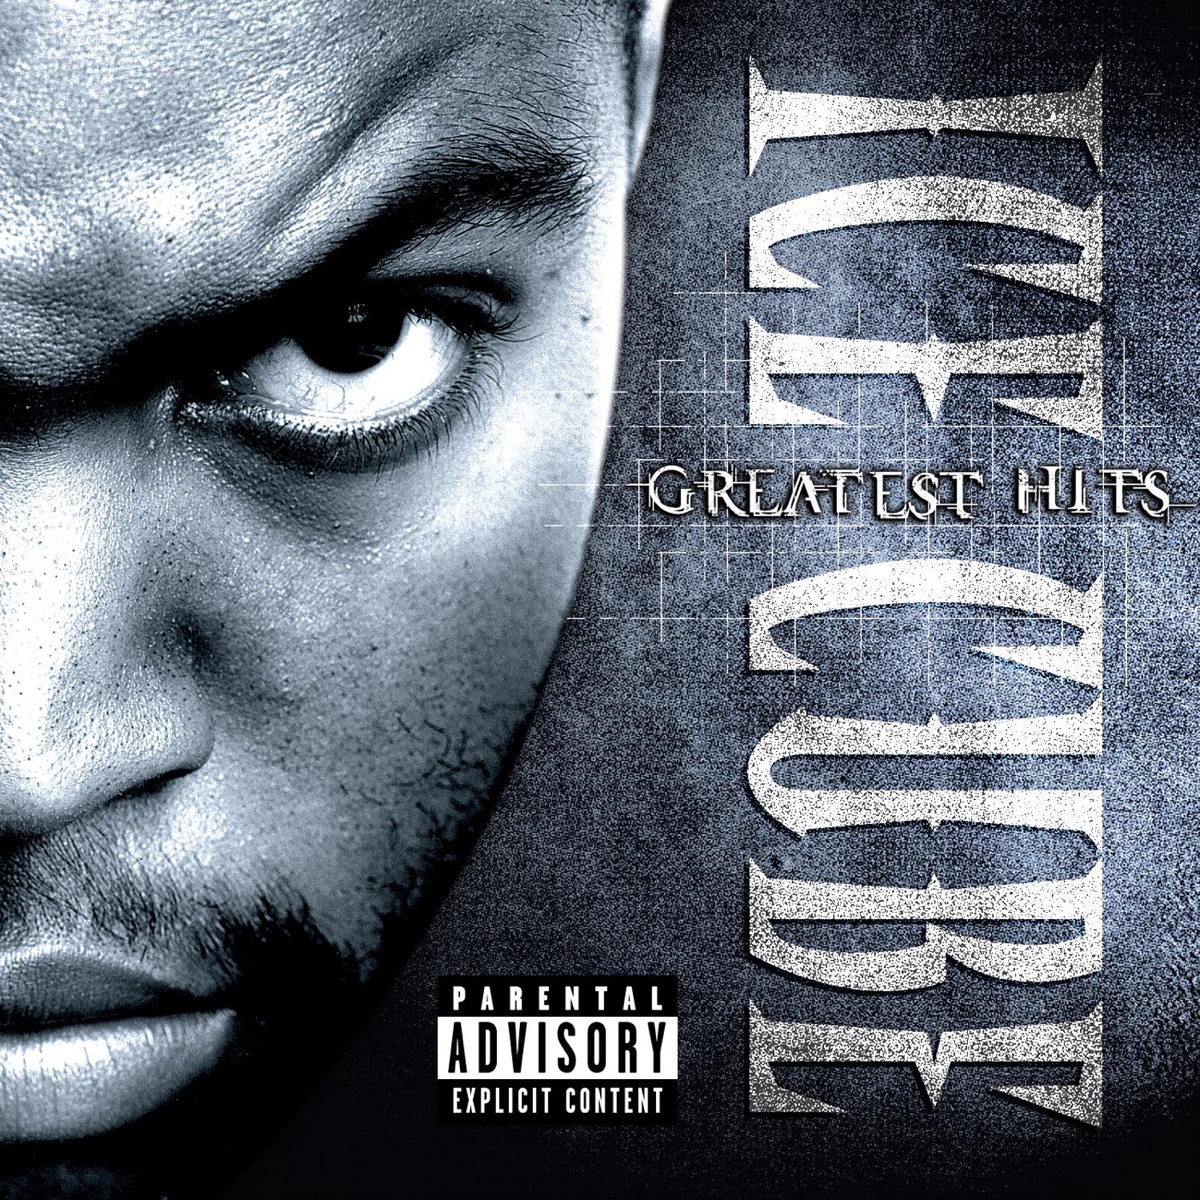 I Am the West by Ice Cube on Apple Music